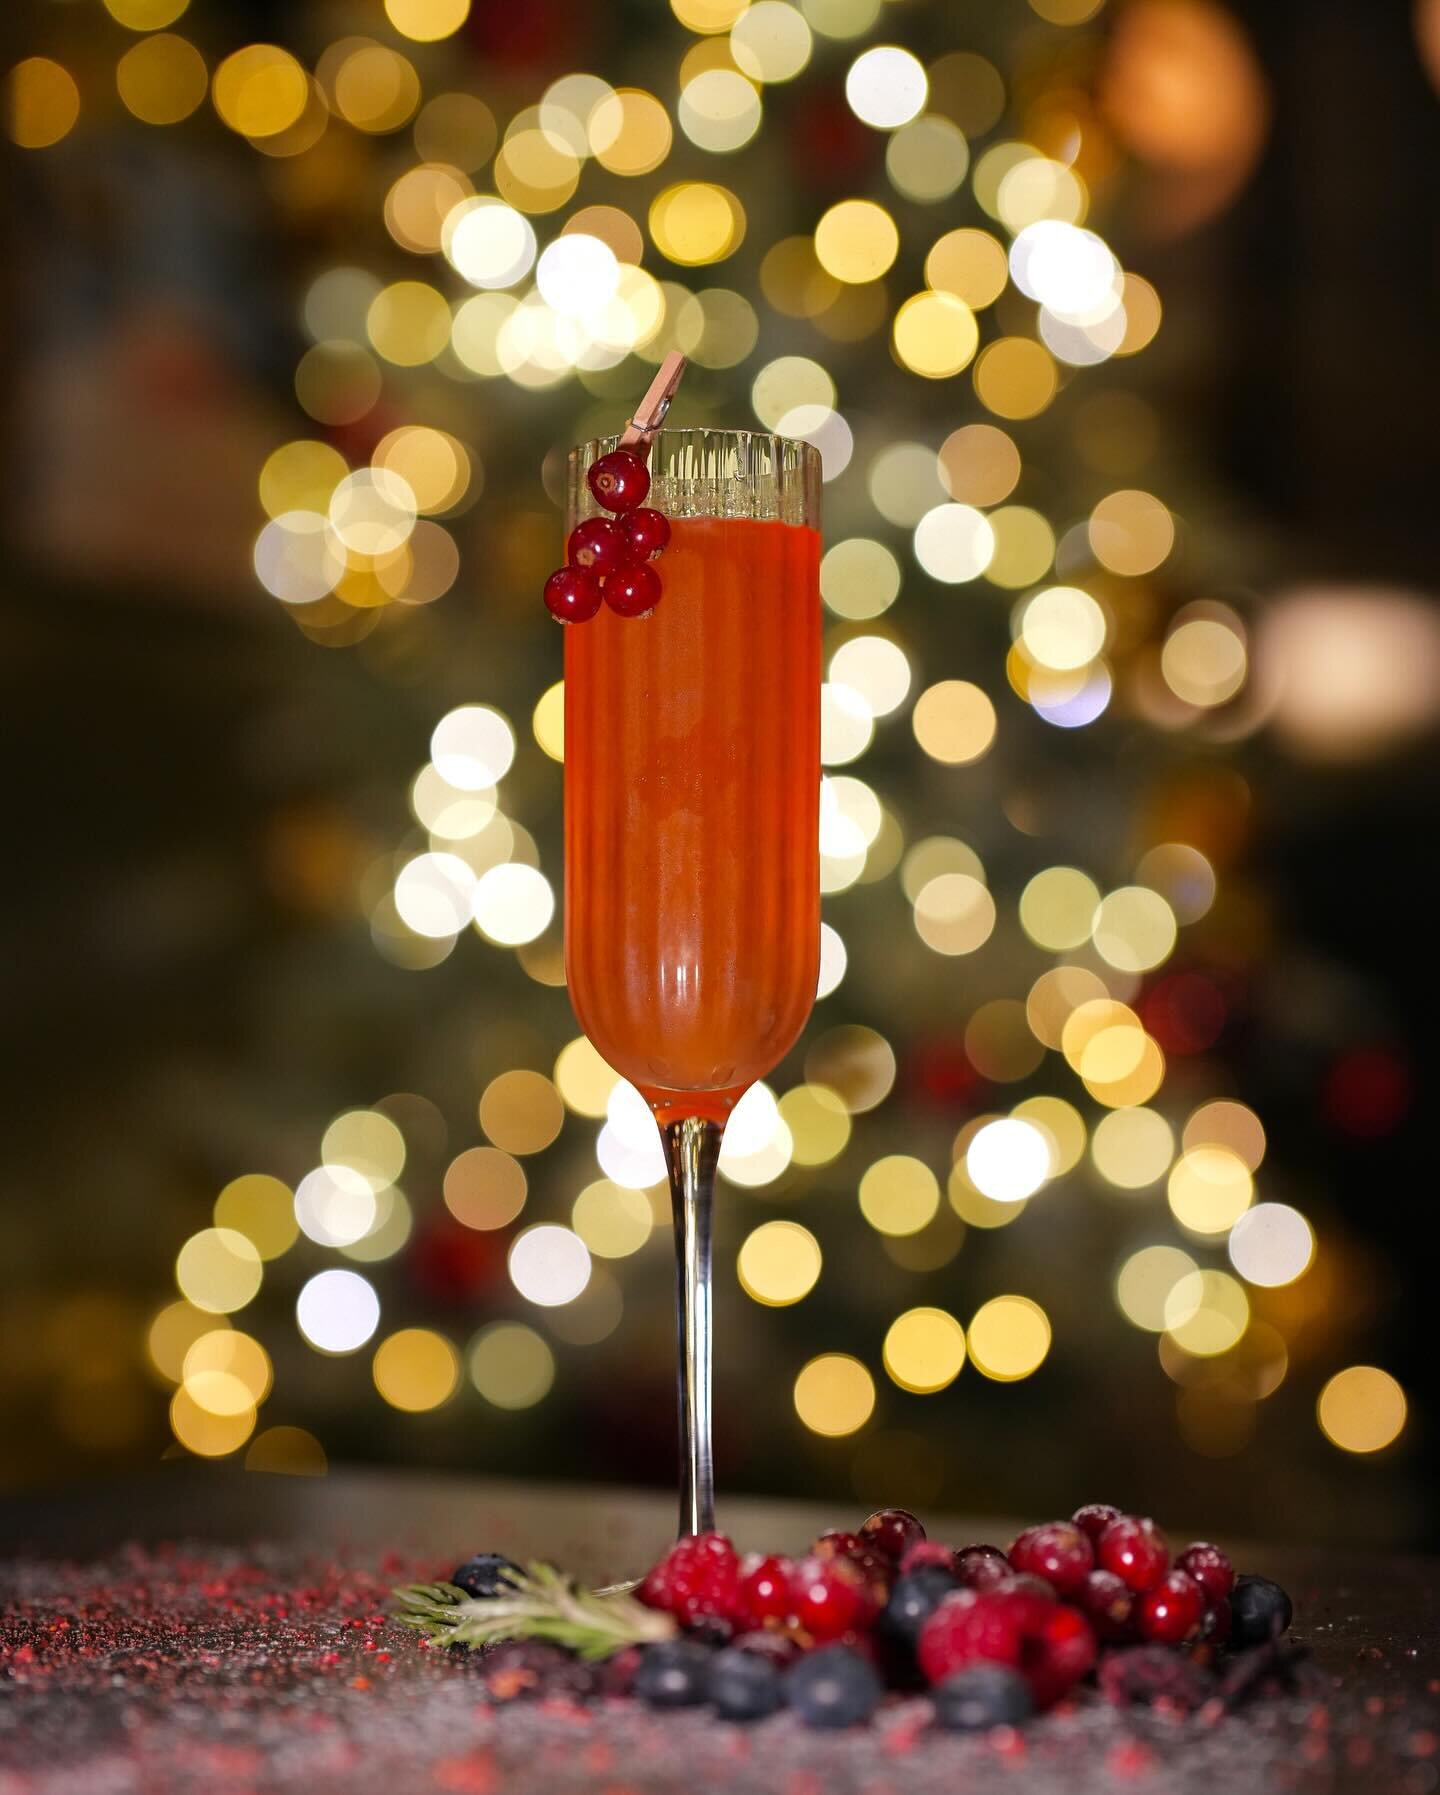 Christmas has begun at Branded! ✨🎄

Enjoy our selection of all-new handcrafted Christmas Cocktails:

- Holly Tequila Highball ❄️
- Christmas 75 🎅
- Winterberry Cheer ✨

Experience the magic of Christmas at Branded! Join us throughout December for u